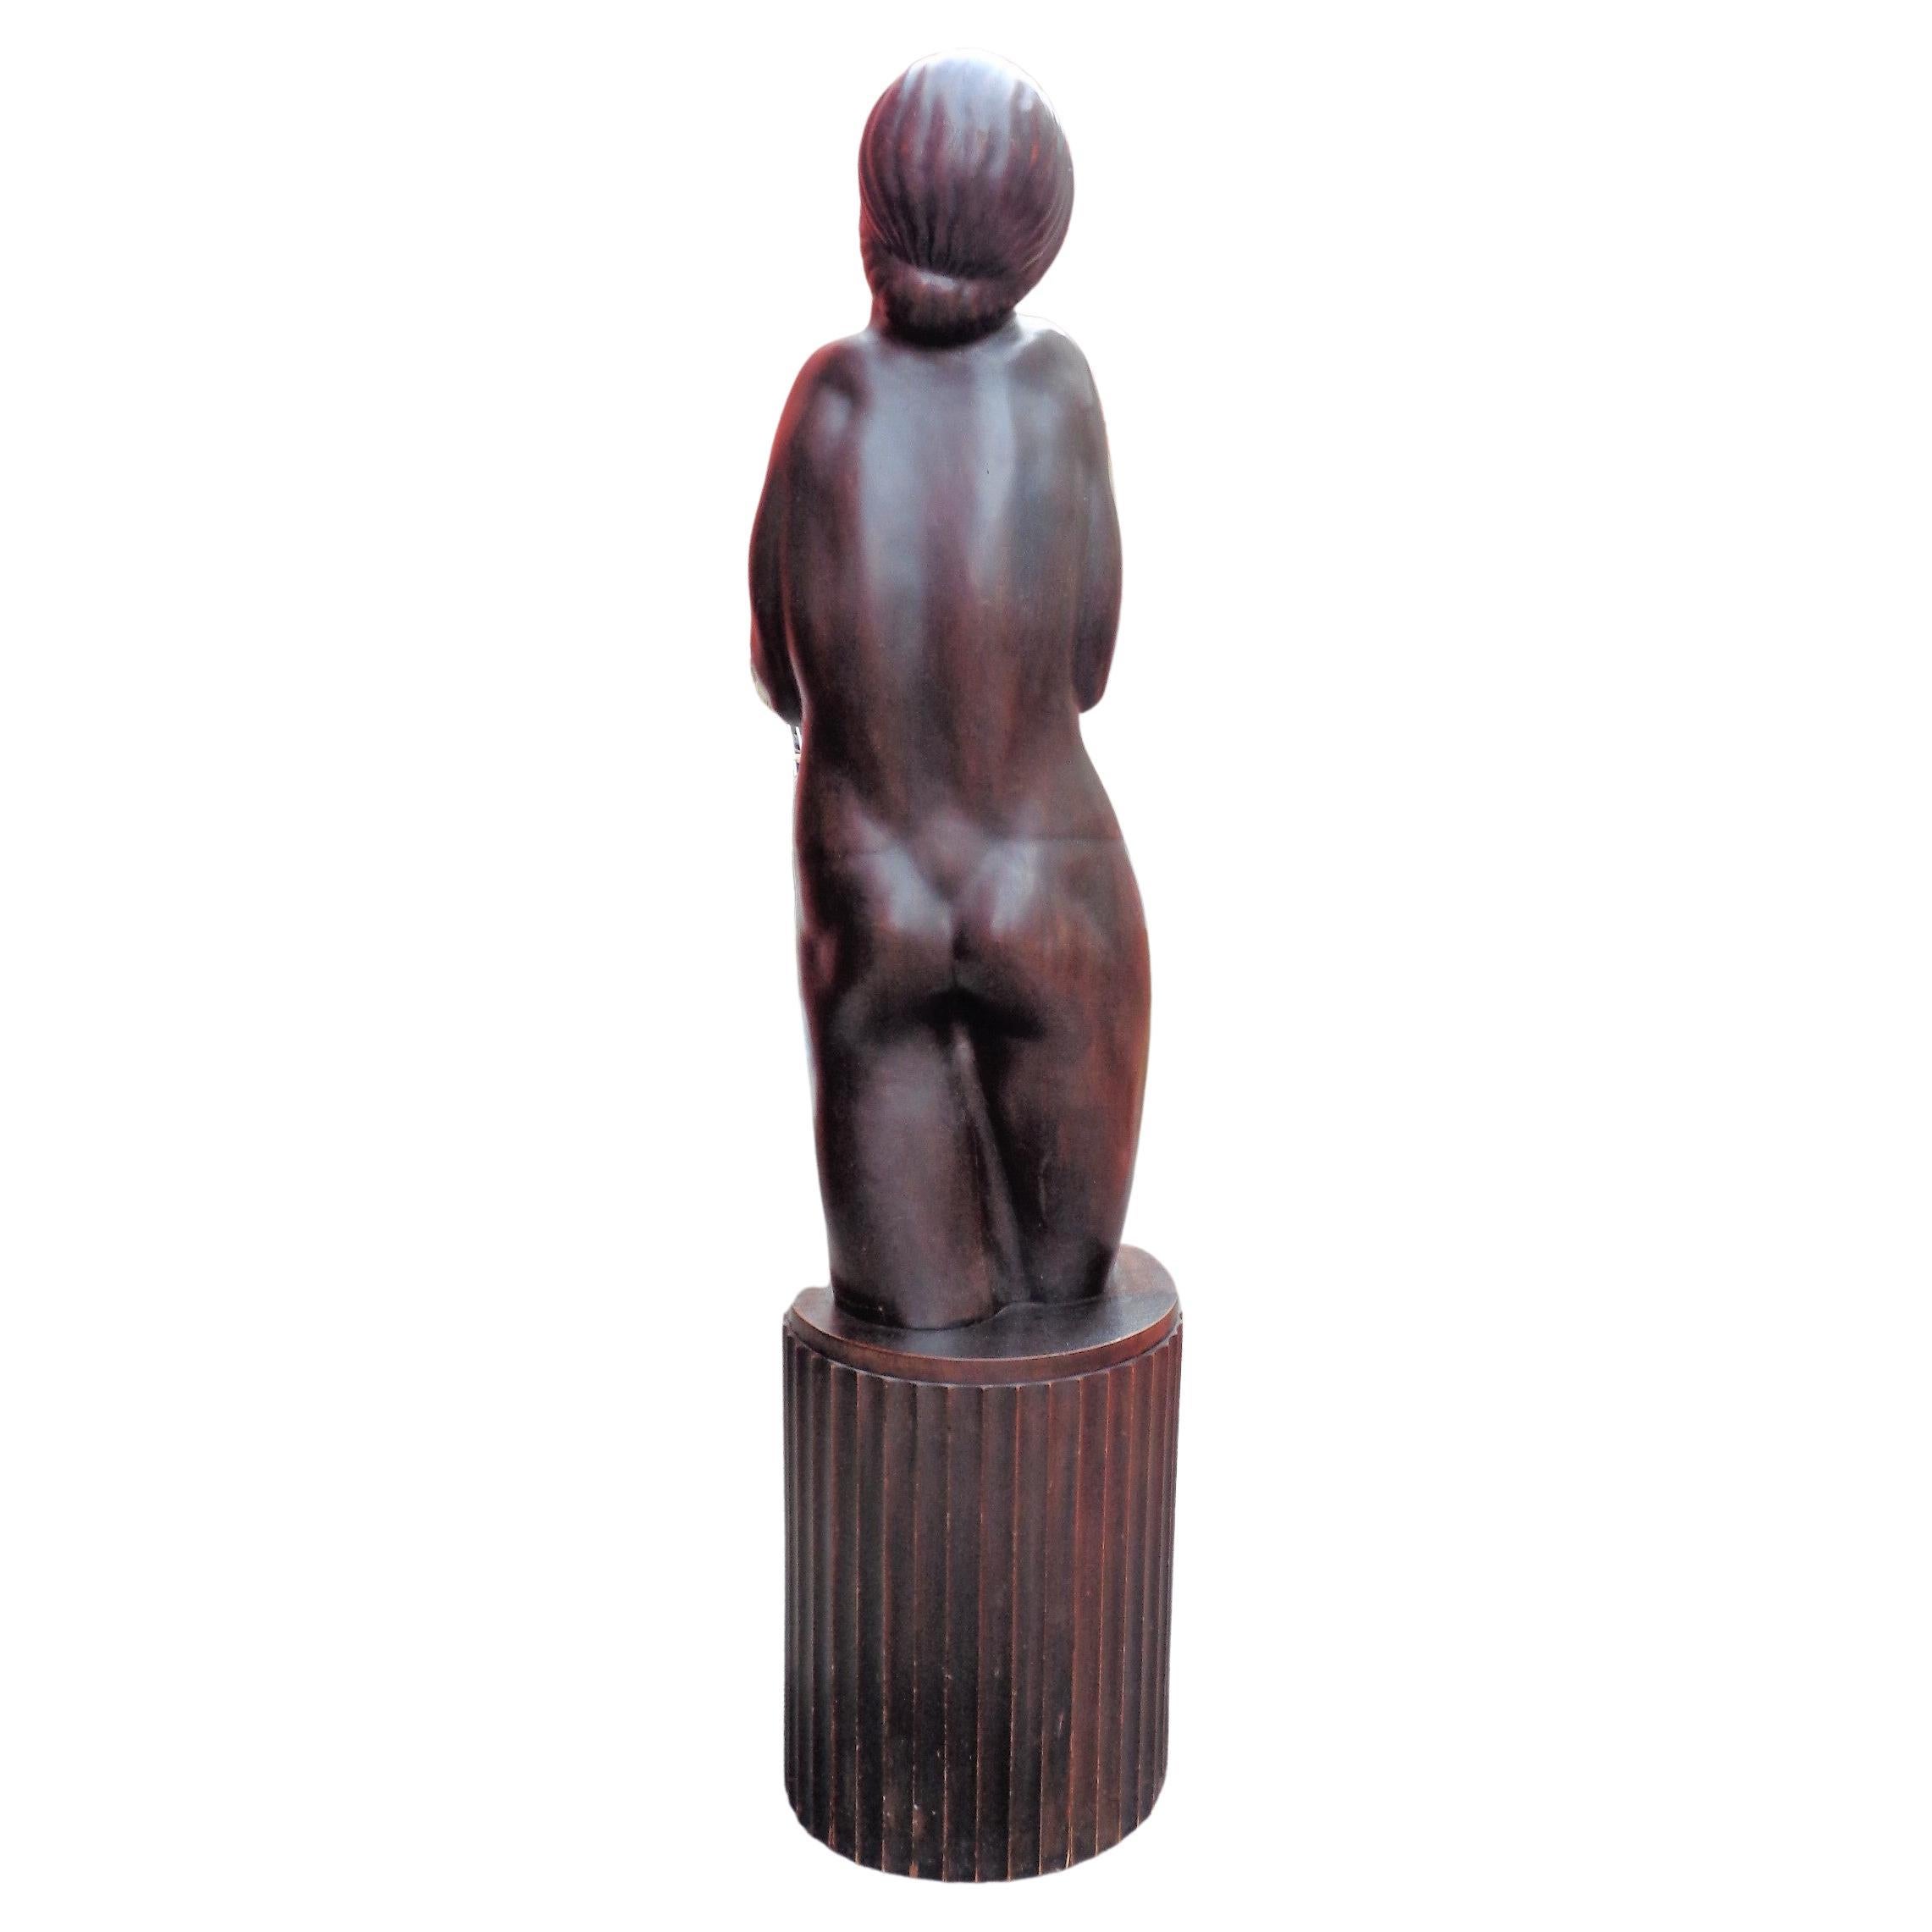 French Art Deco Walnut Sculpture Nude Woman, circa 1920 For Sale 2